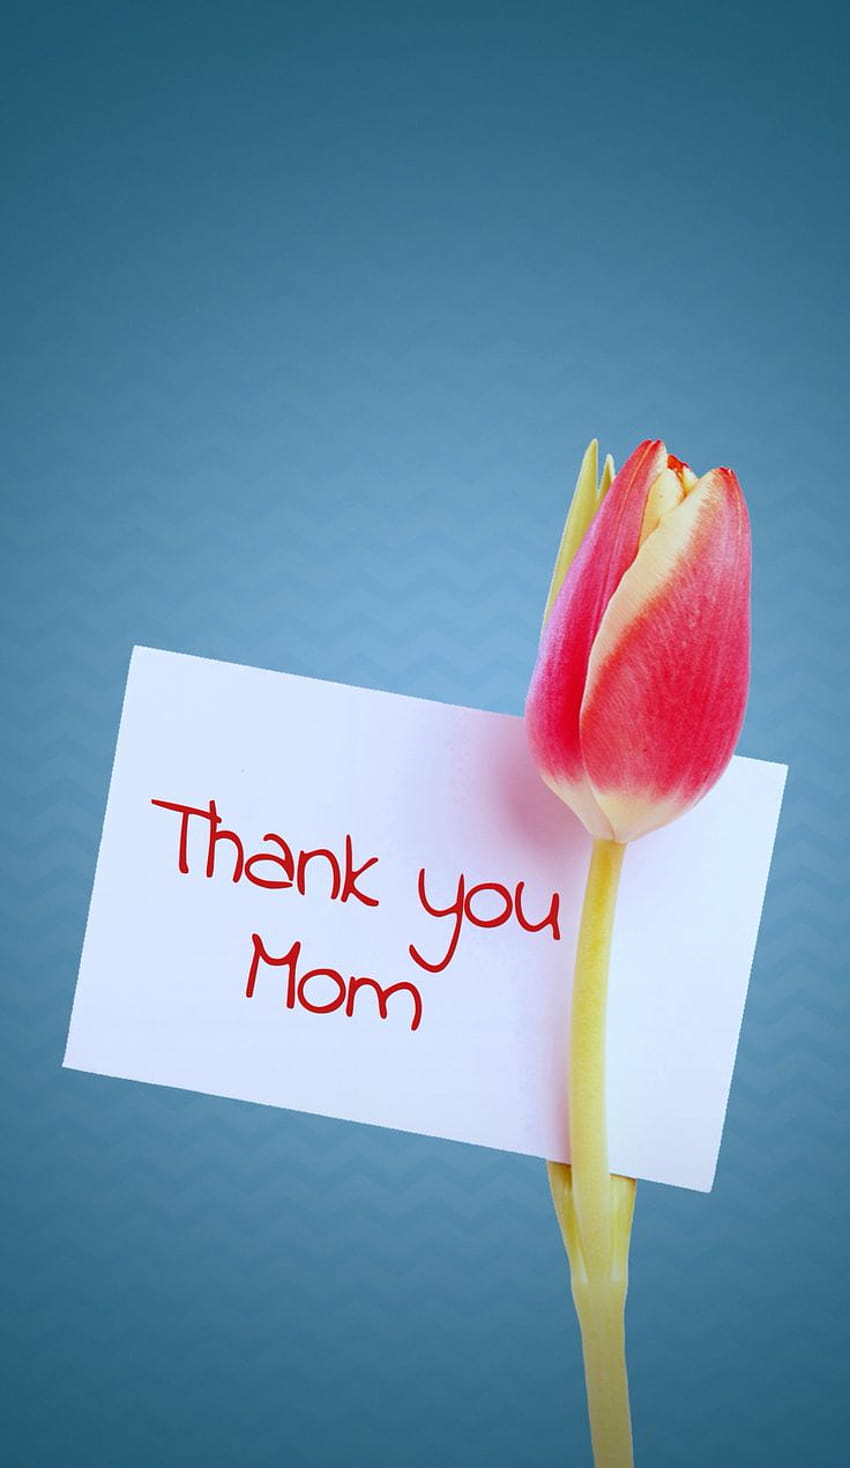 HAPPY MOTHER'S DAY, DAY, HAPPY, MOTHERS, CARD, HD wallpaper | Peakpx